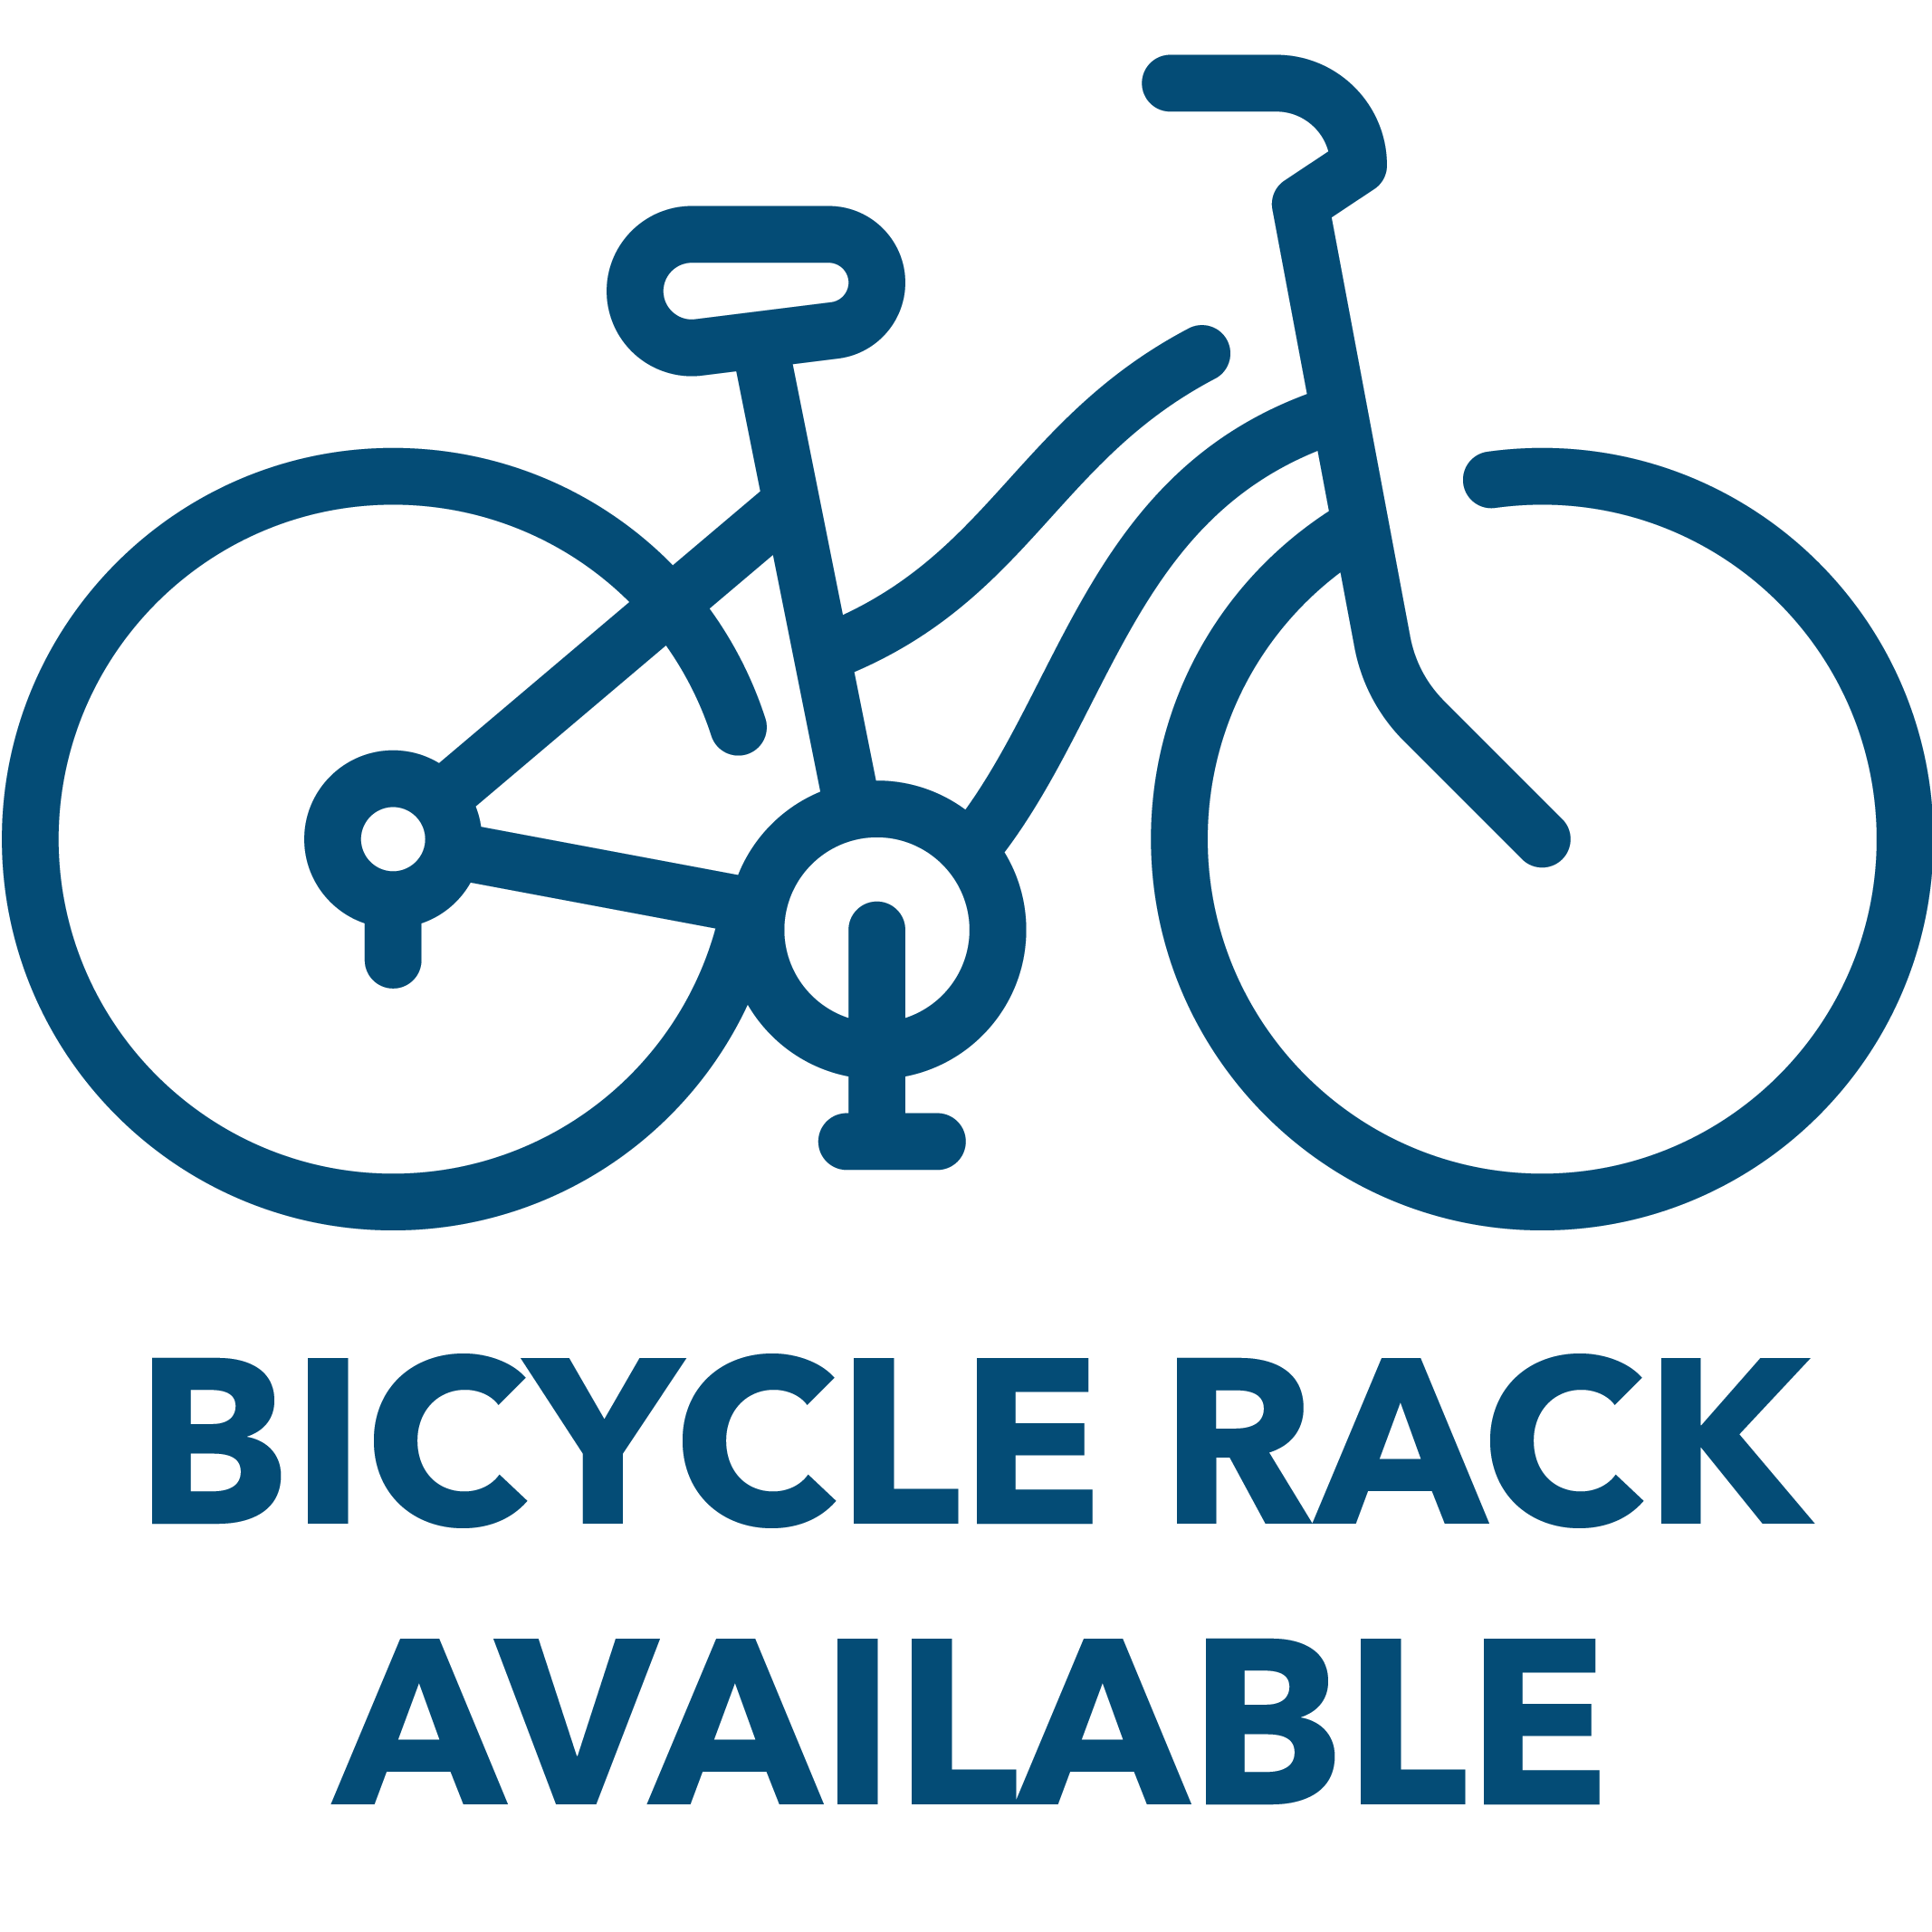 Amenities: Bicycle Rack available